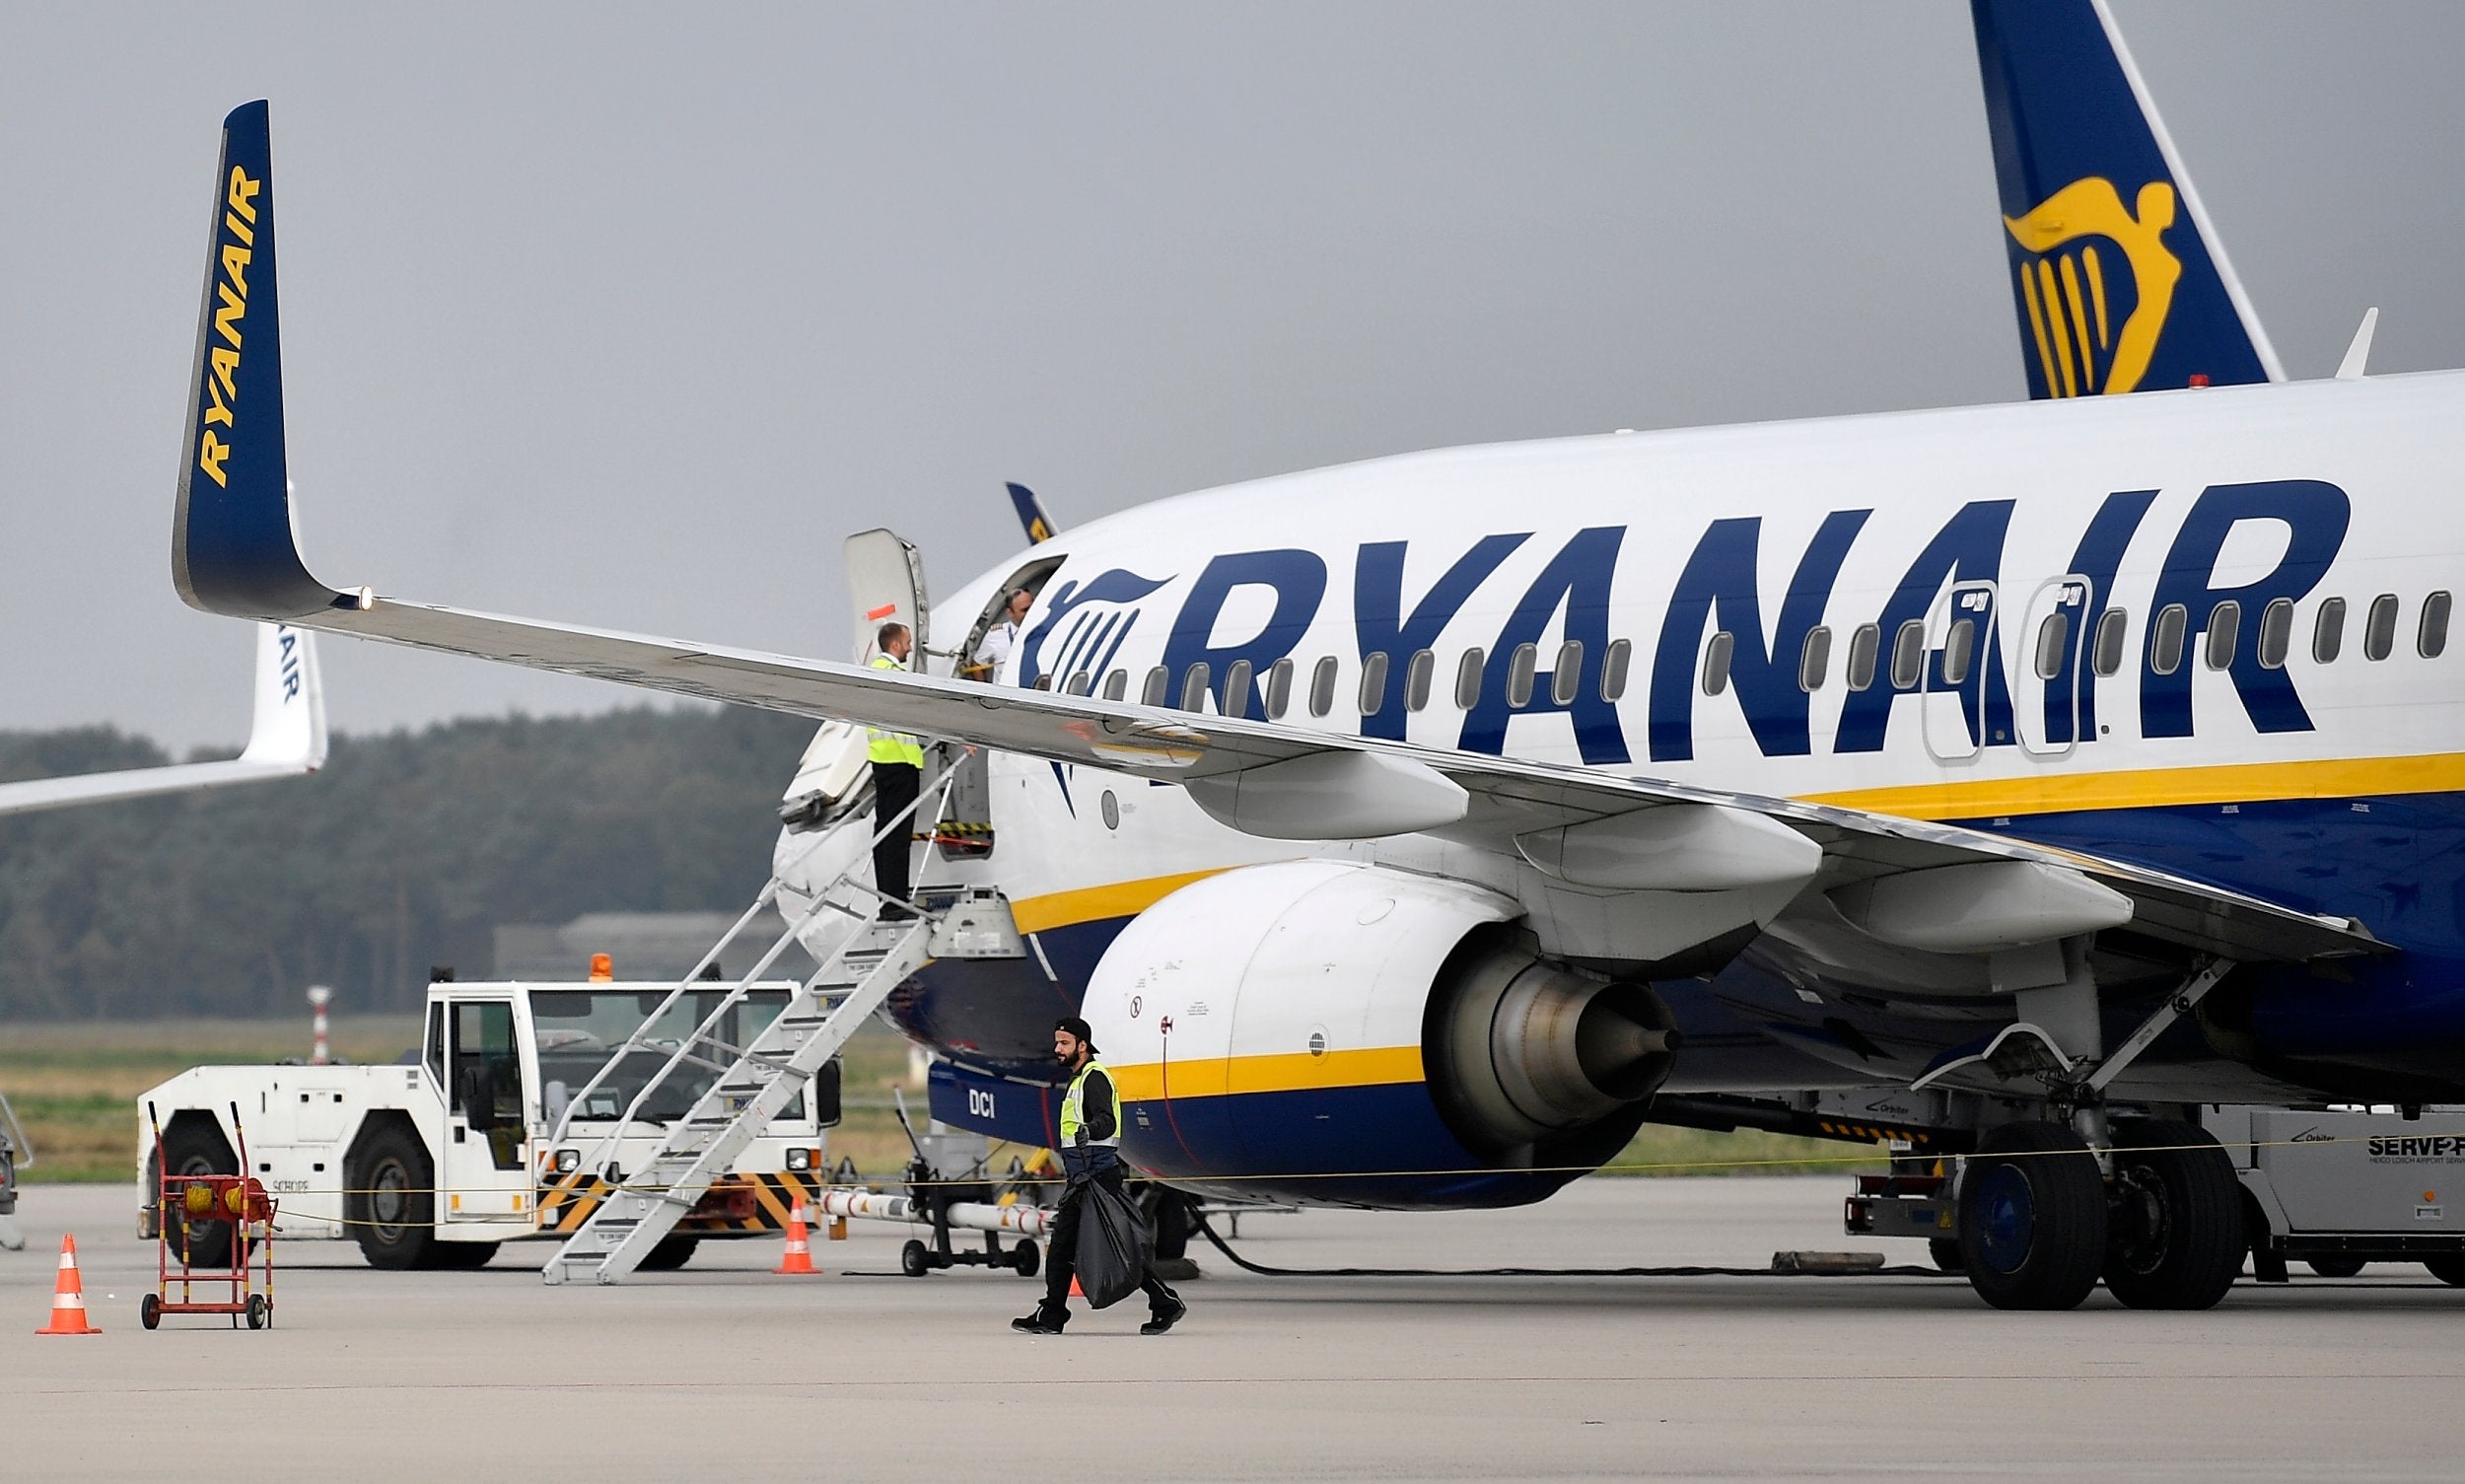 Ryanair has signed an agreement with the German pilot union VC